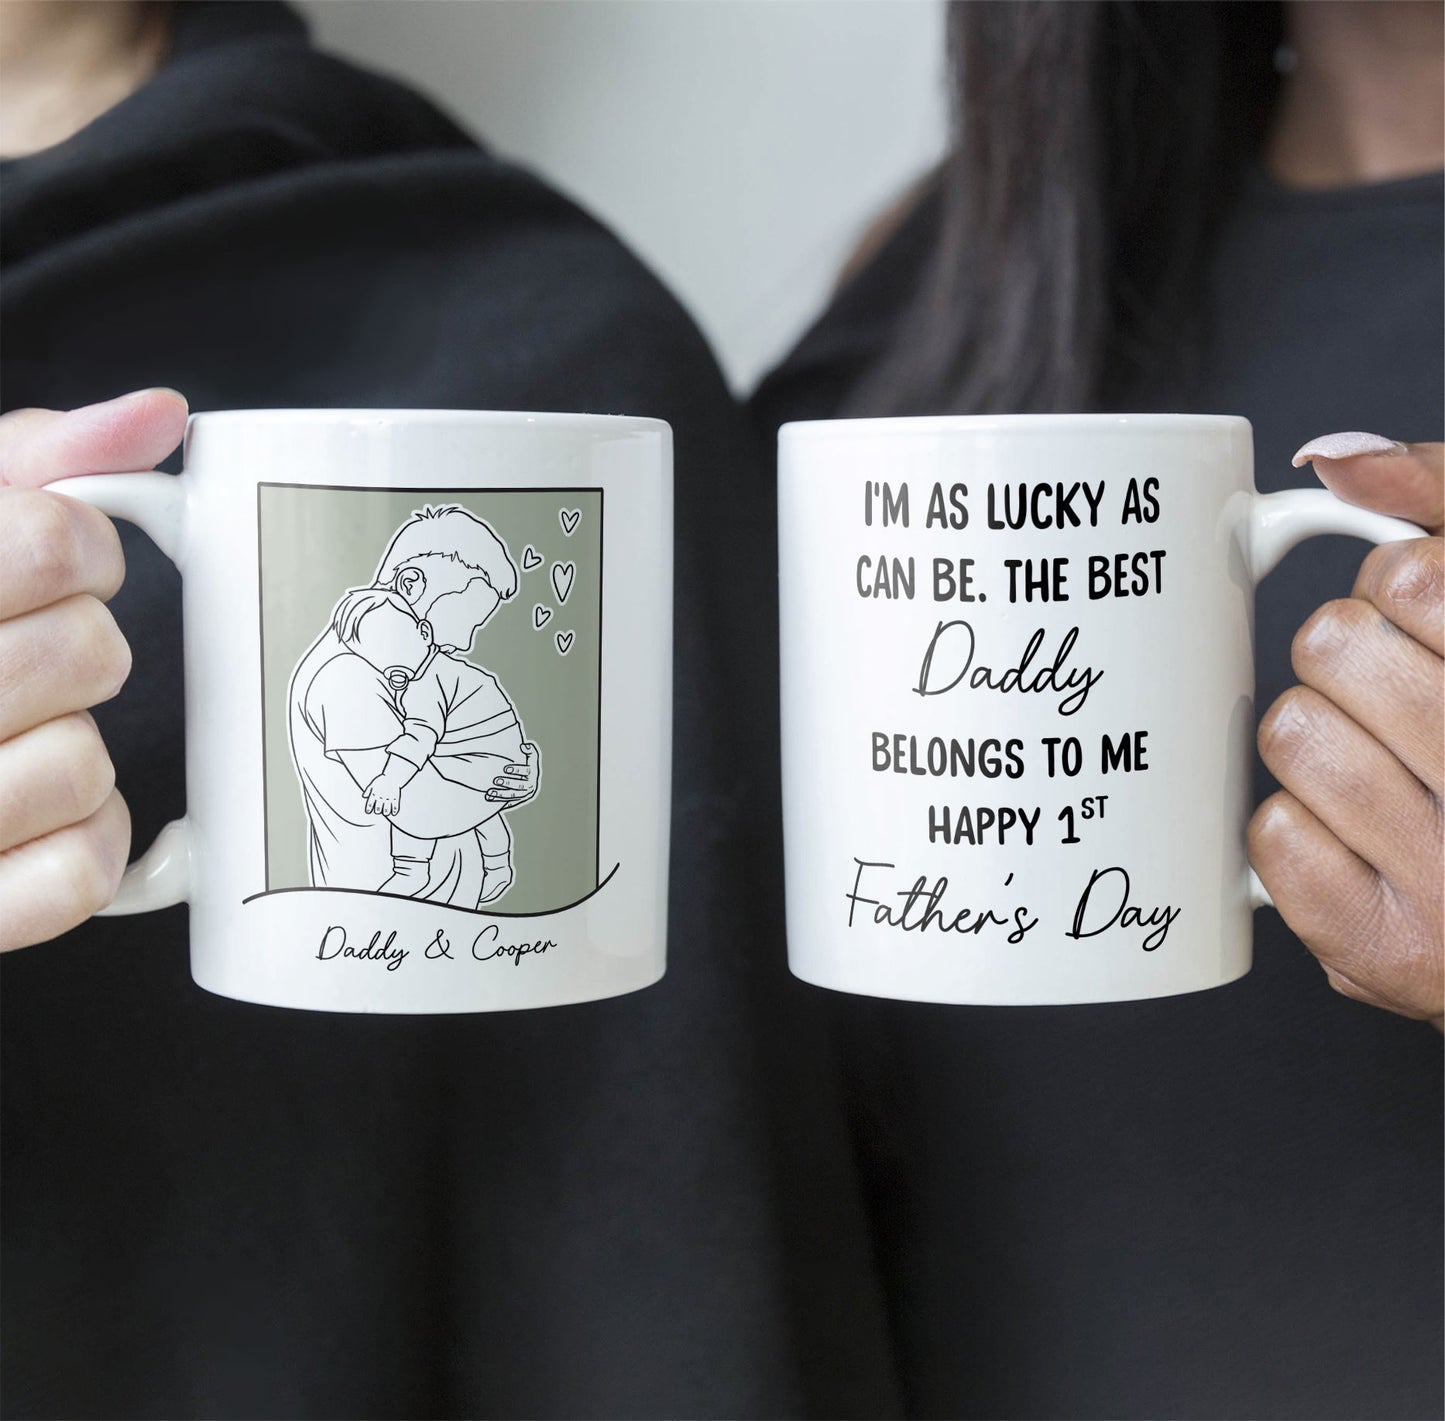 The Best Daddy Belongs To Me - Personalized Mug